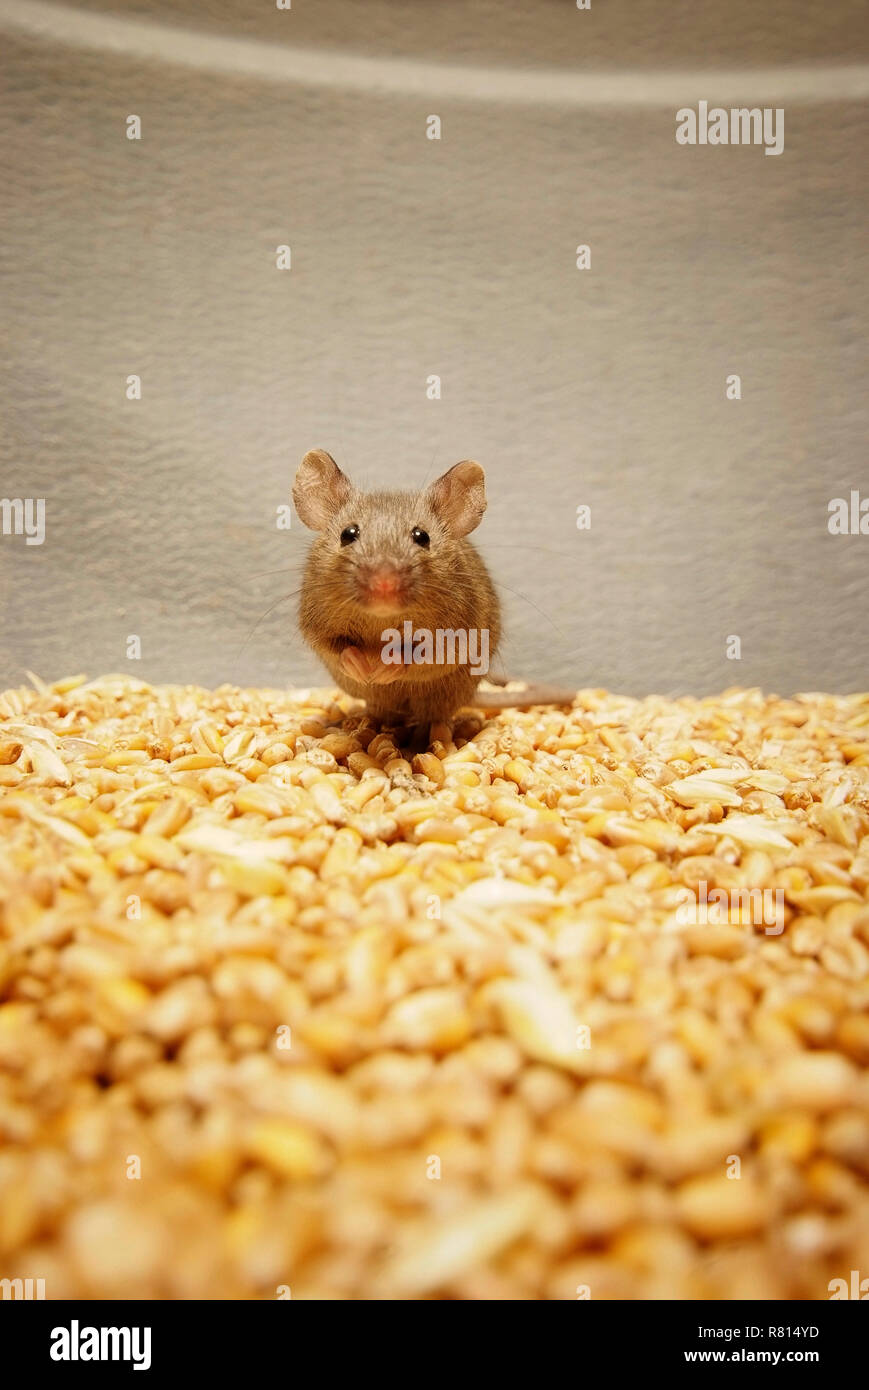 House mouse (Mus musculus) sitting on wheat grains, looks scared, Germany Stock Photo